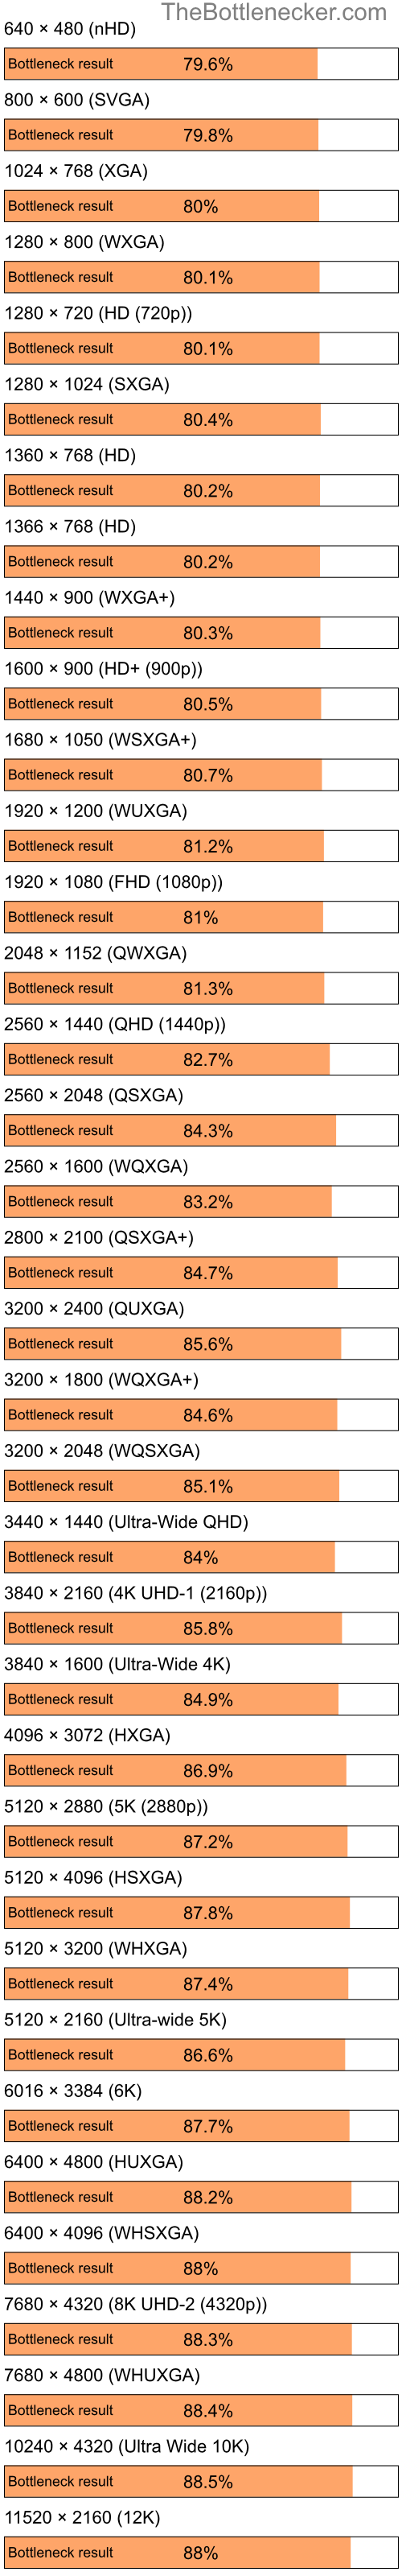 Bottleneck results by resolution for Intel Celeron M and NVIDIA GeForce 6100 in7 Days to Die